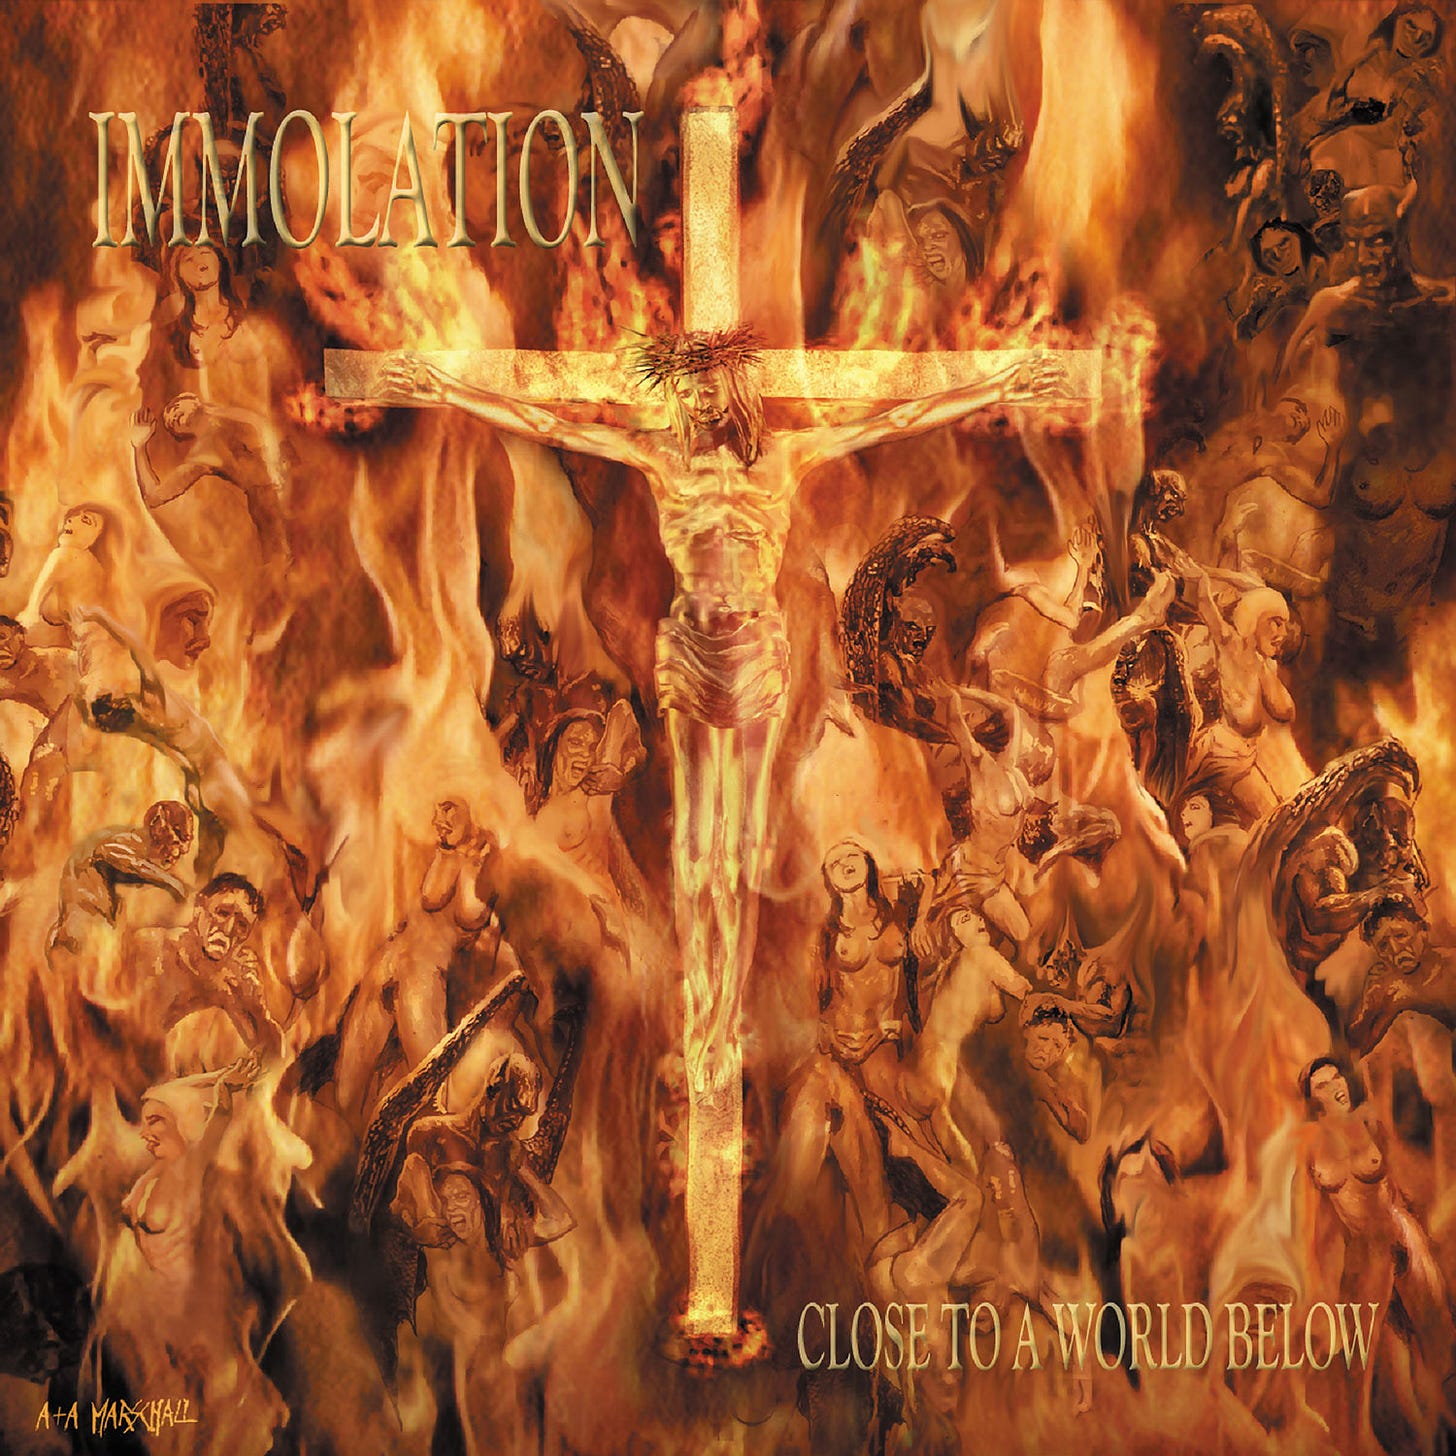 The cover to Immolation’s CLOSE TO A WORLD BELOW. It shows a drawing of Jesus on the cross, on fire, and around him a bunch of naked people, all presumably burning in hell. The whole thing is orangey-yellow.